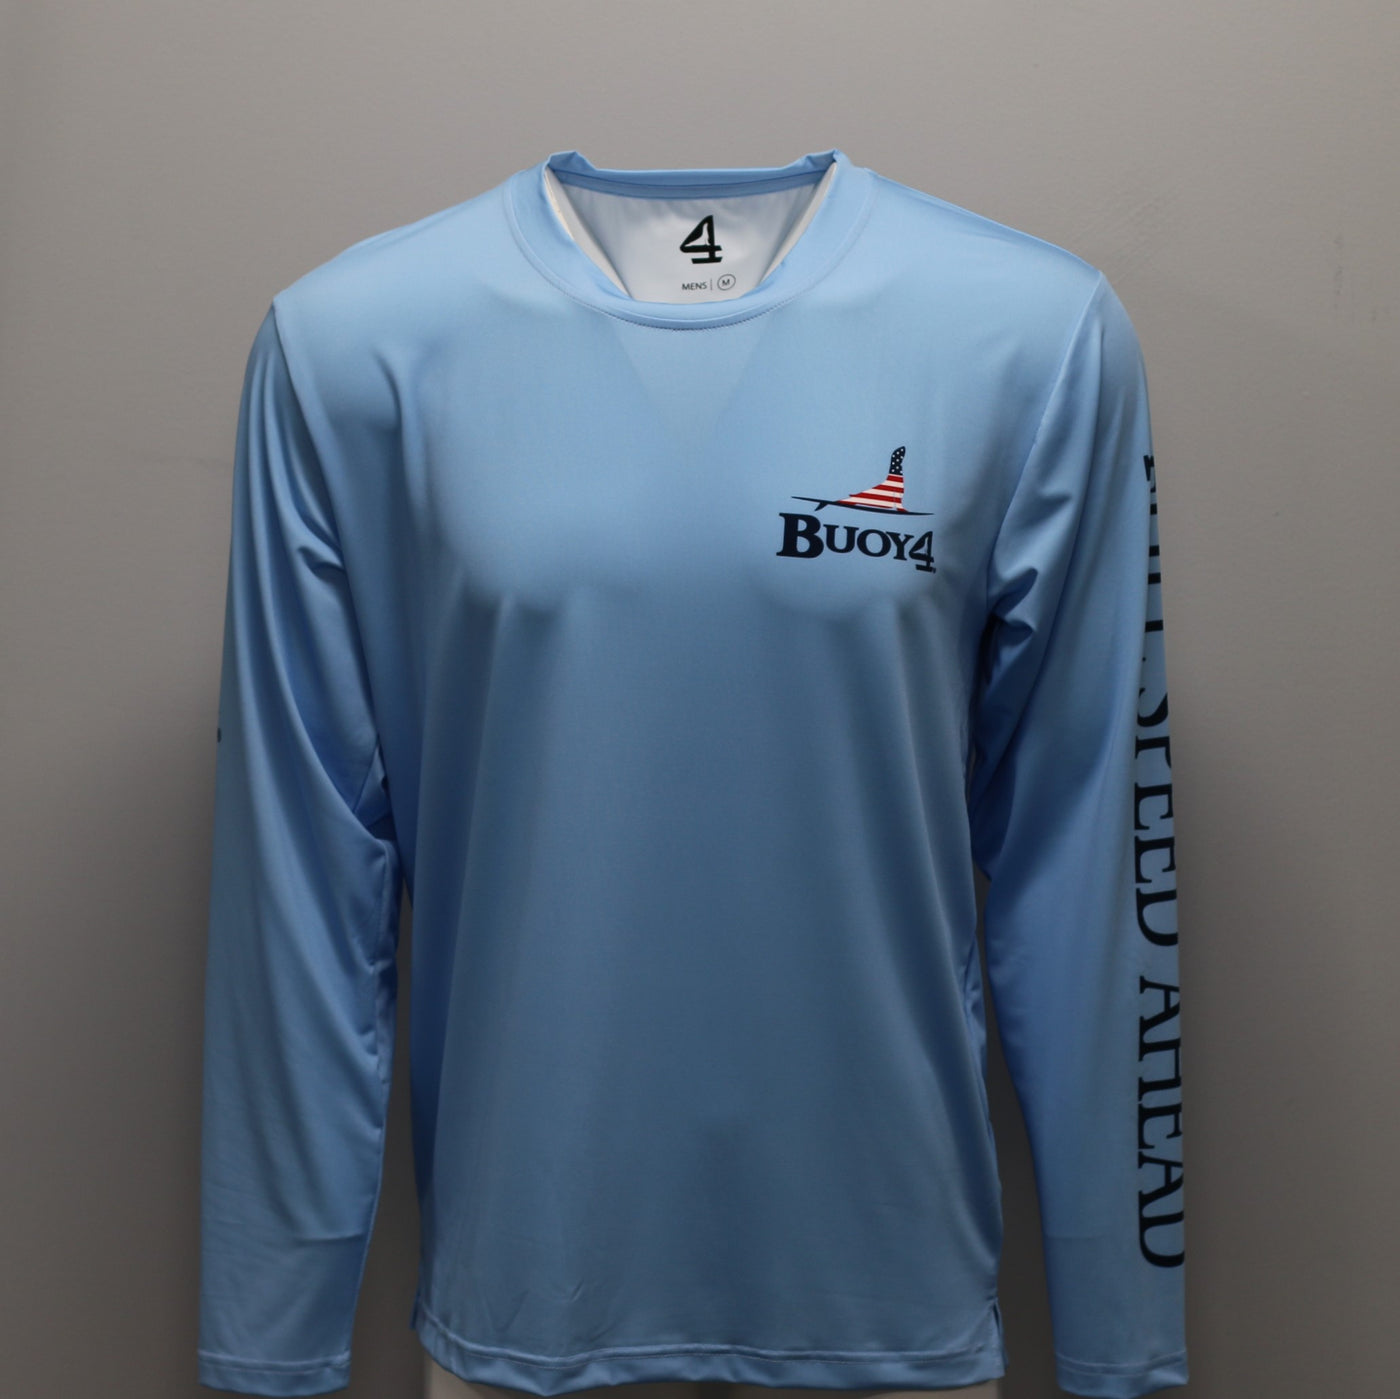 reLAX By The Sea - USA - Light Blue - Performance Long Sleeve